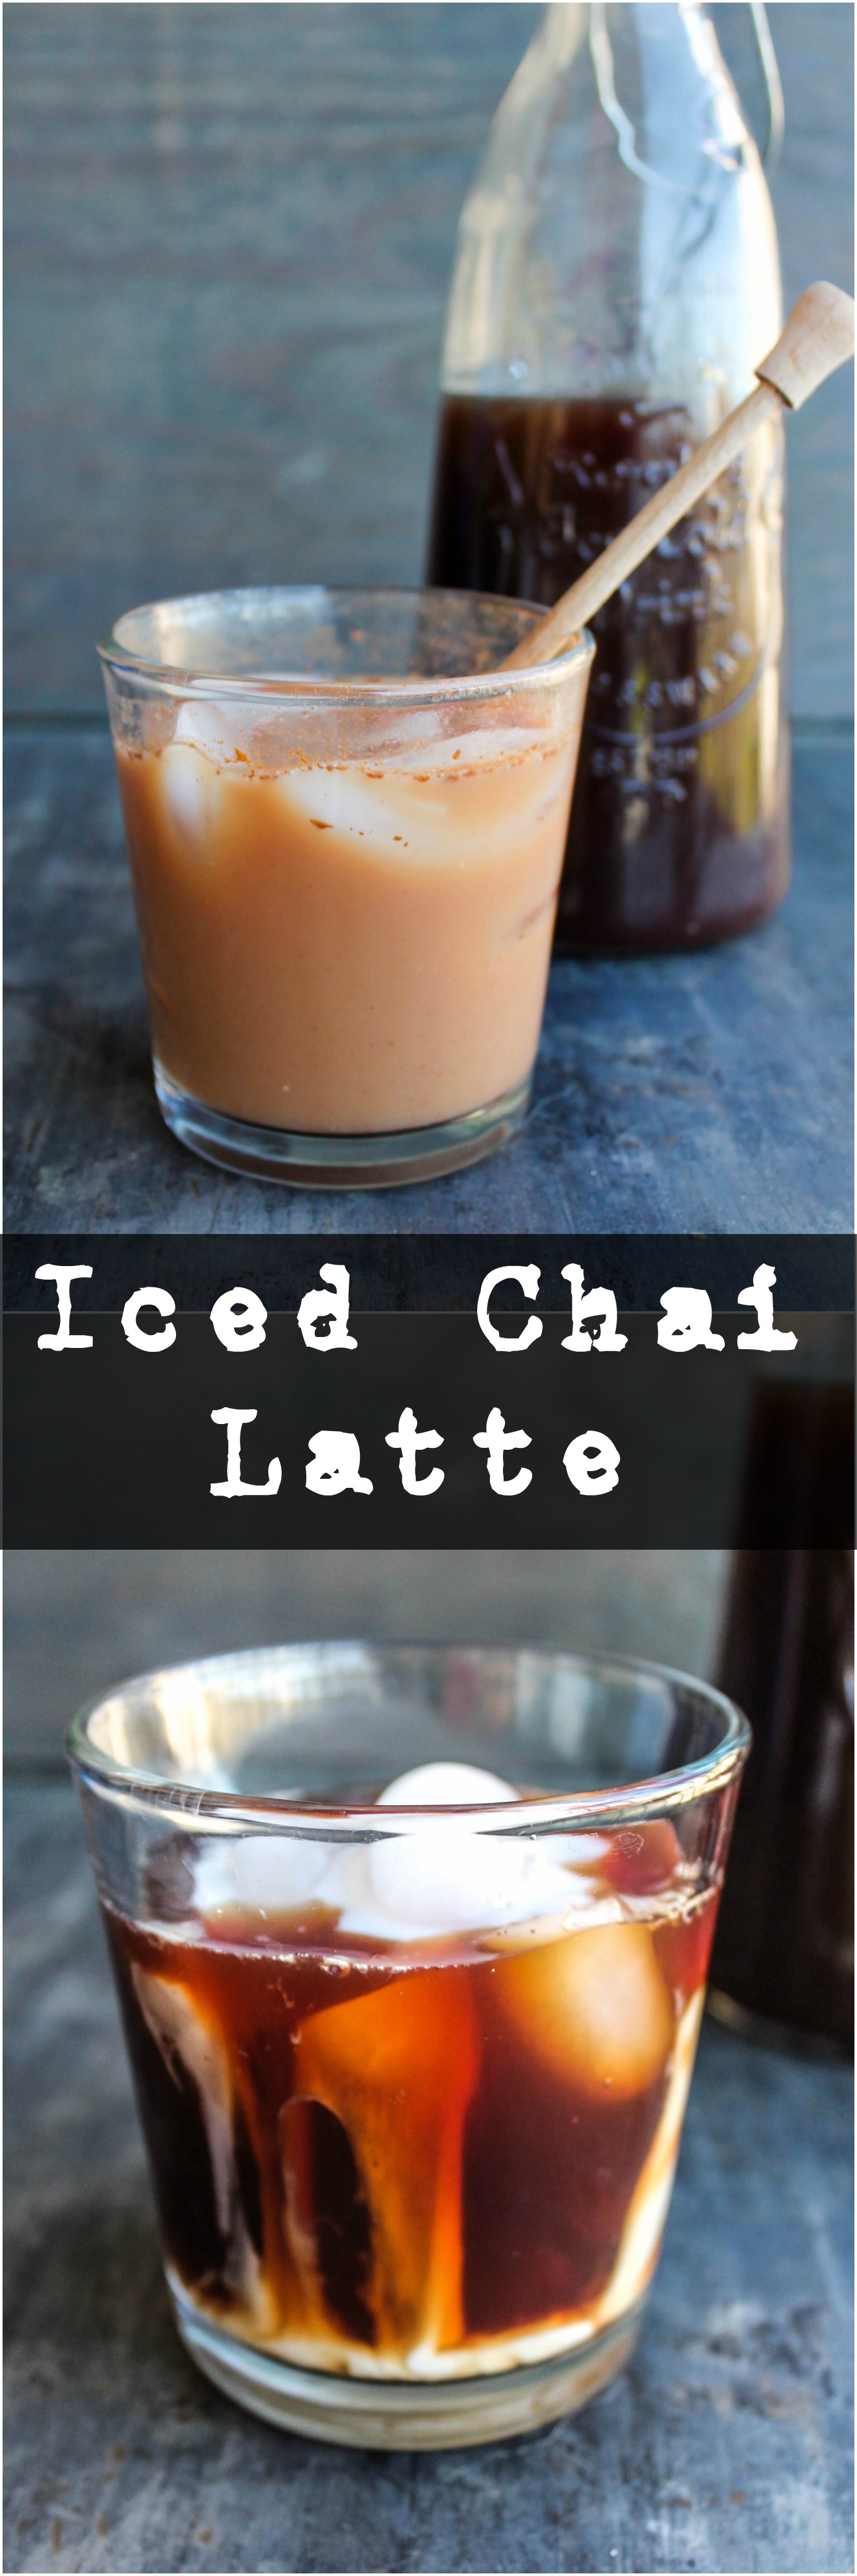 Enjoy Iced Chai Latte at the convenience of your own home. Feel free to customize it with the milk and sweetener of your choice!